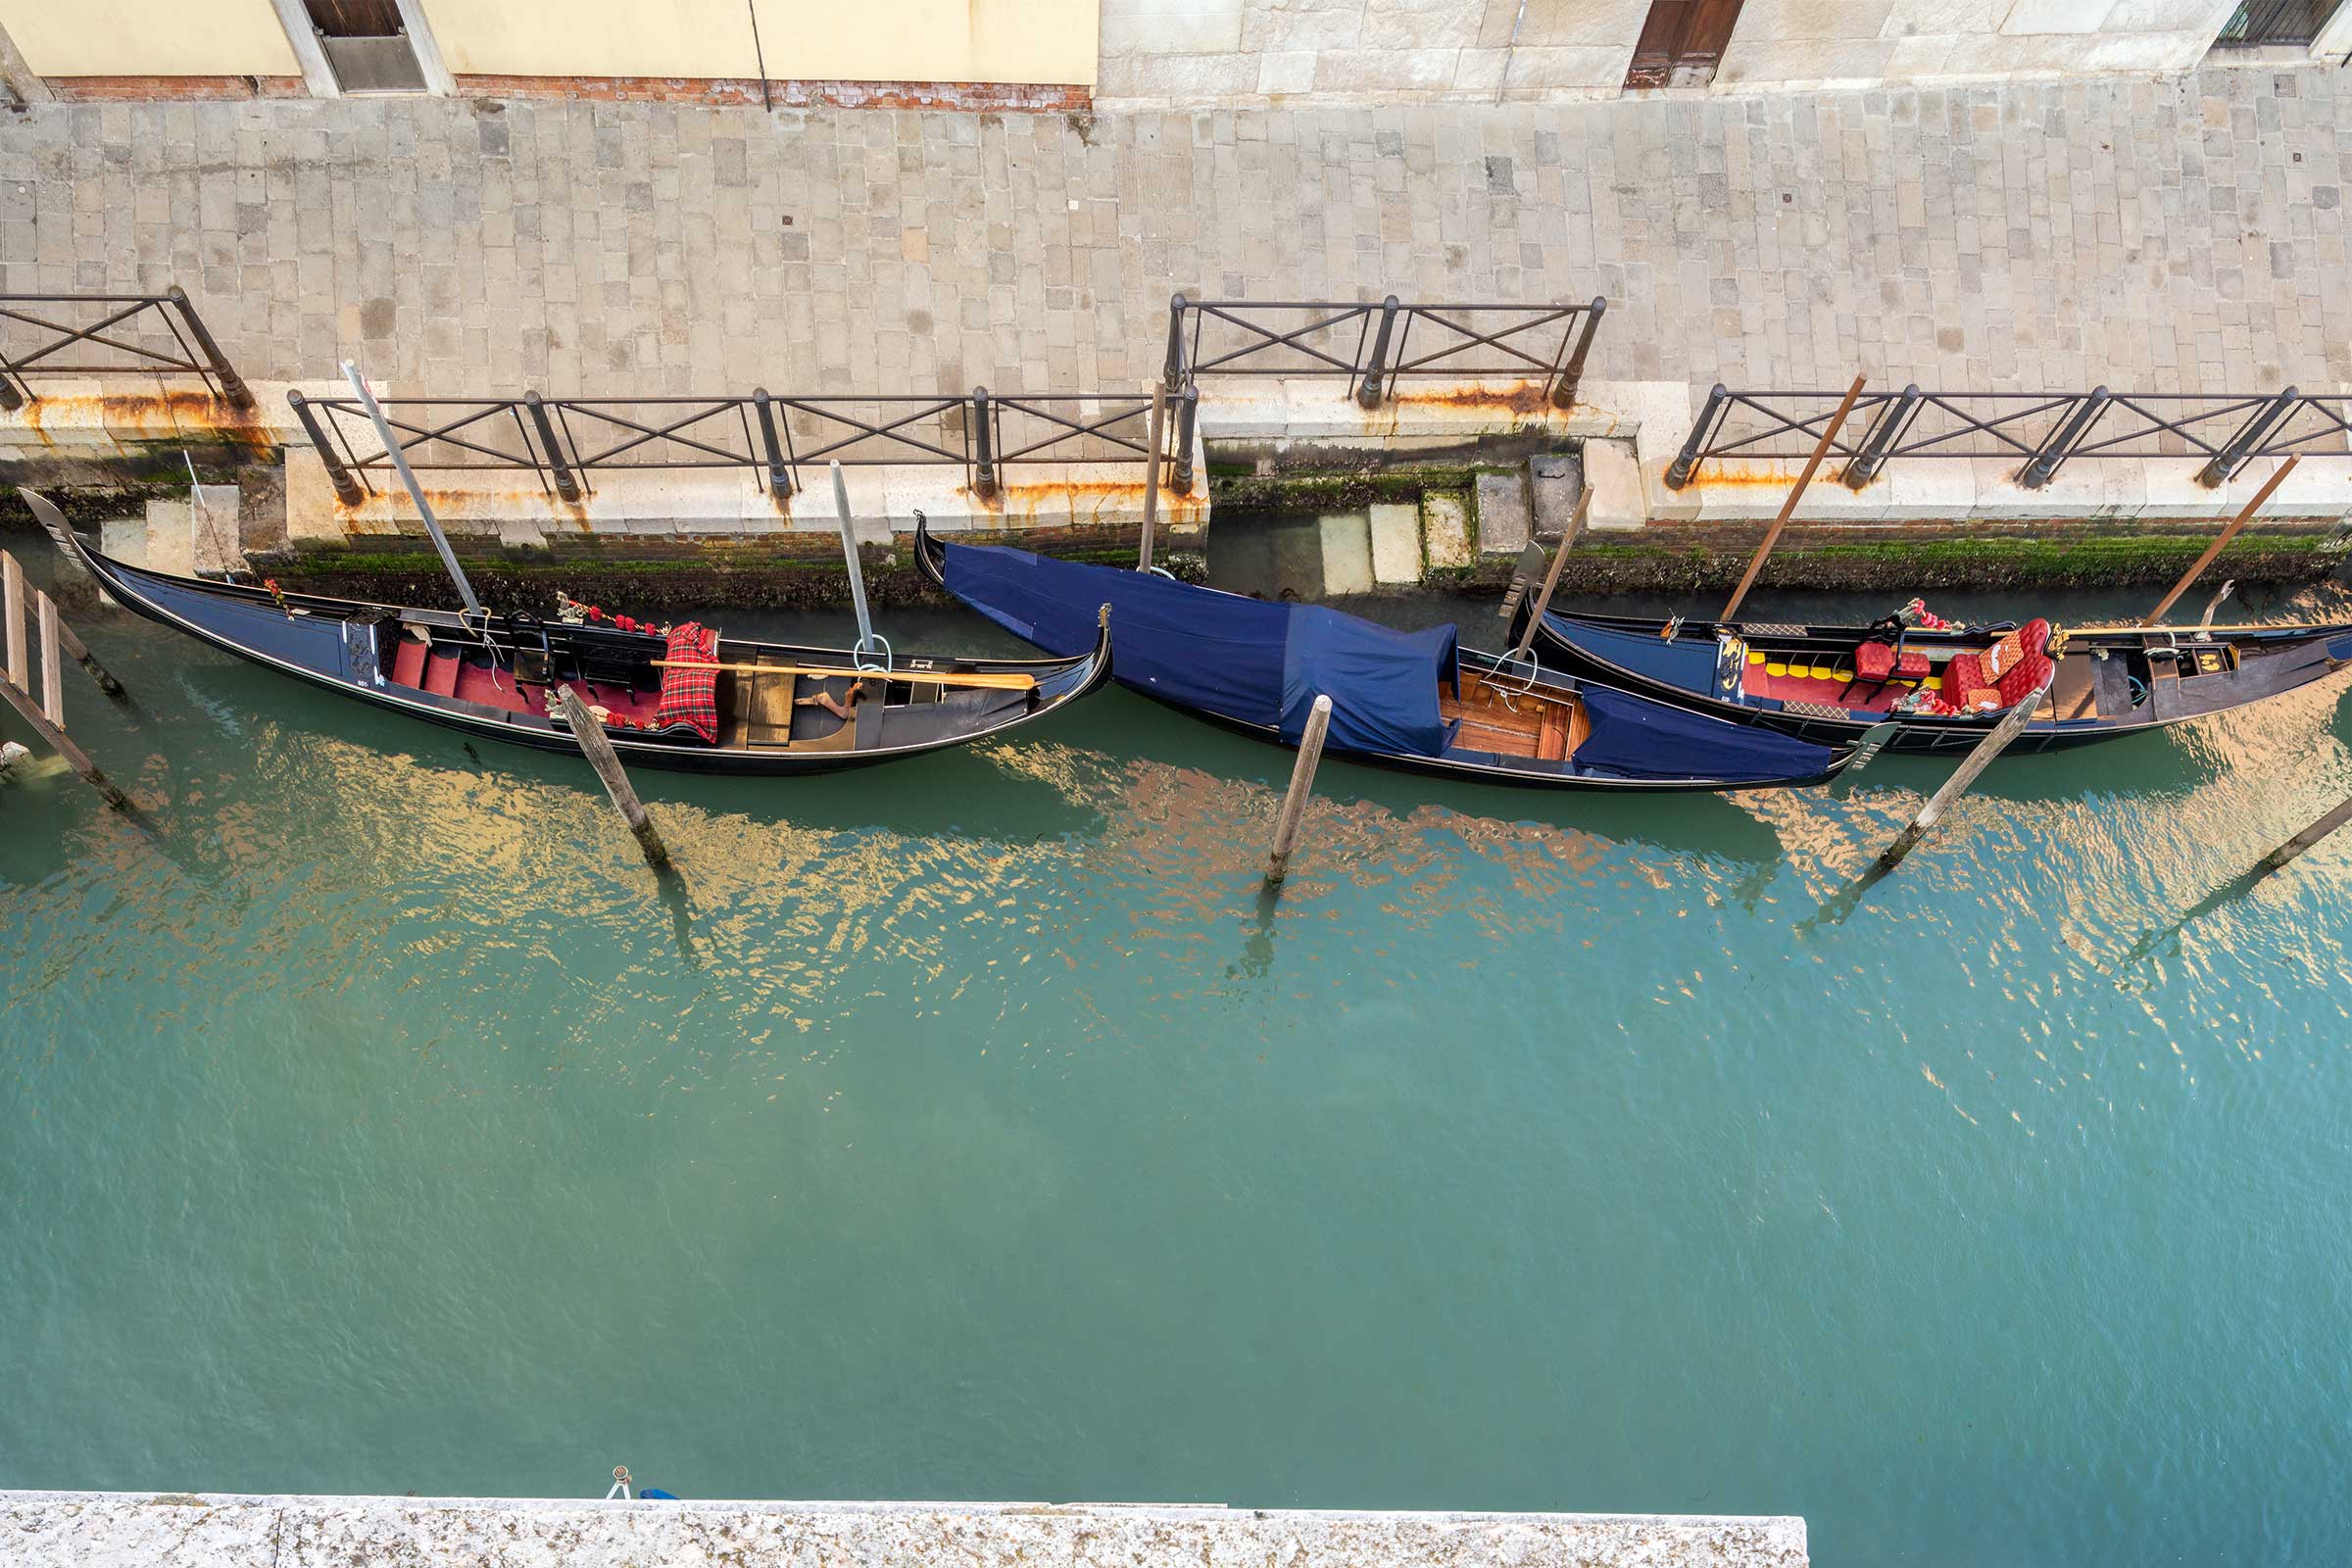 the panoramic canal view from the many windows is truly Venetian